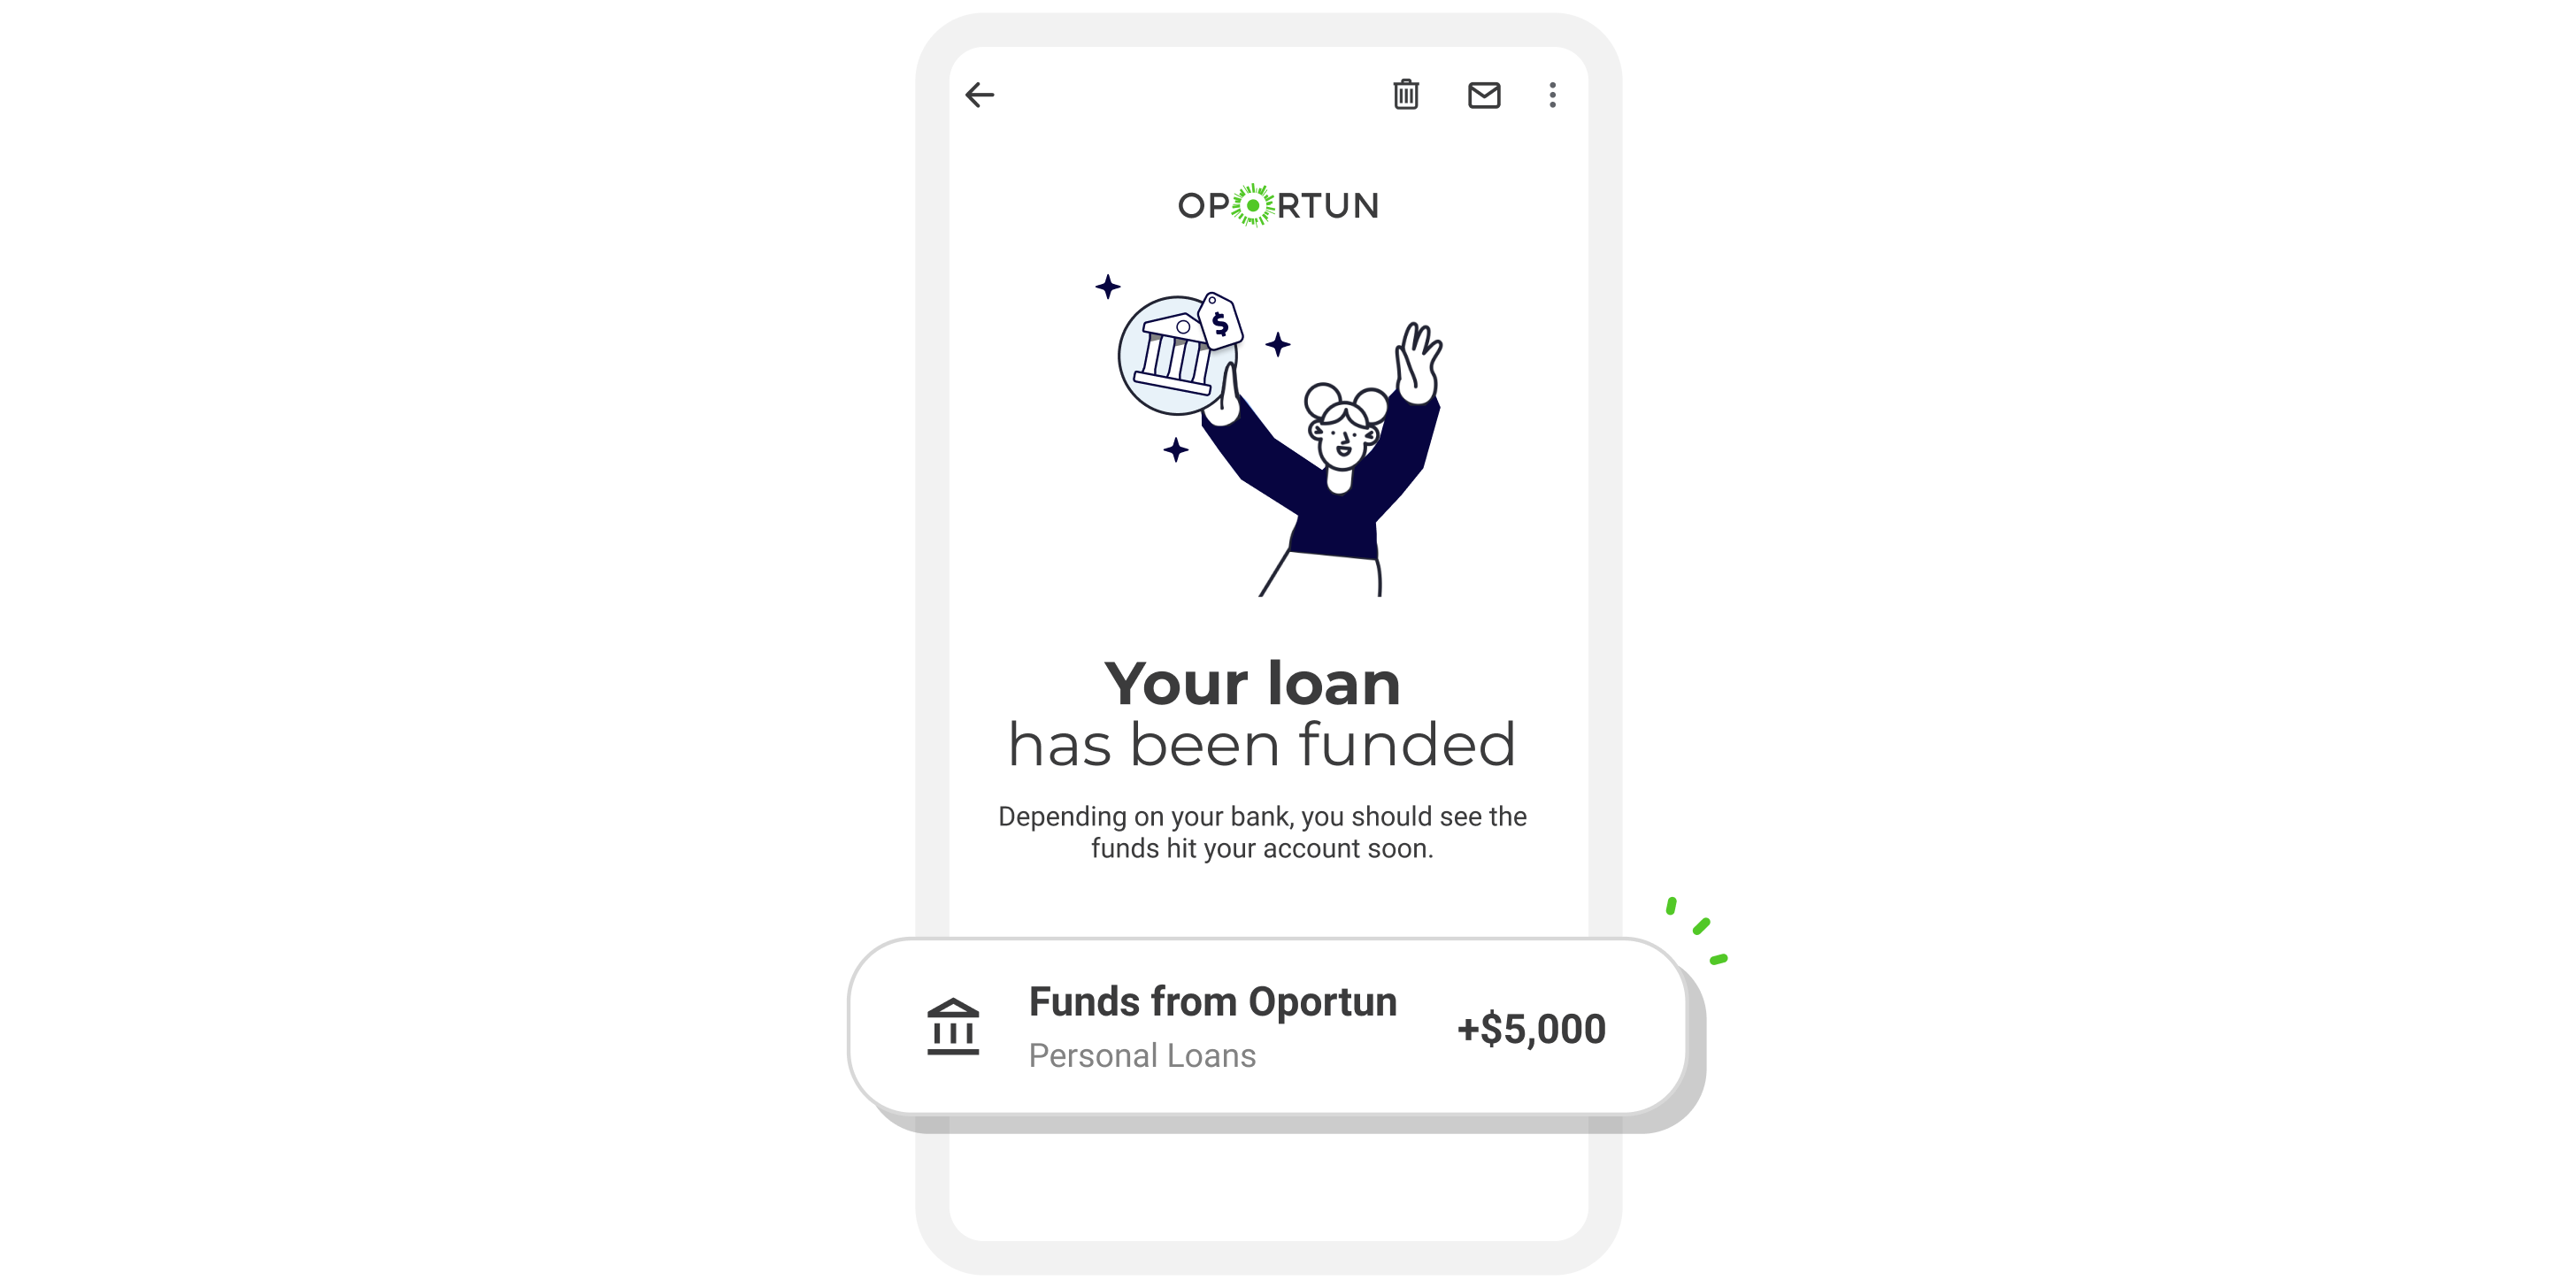 Find out how the application process to get an Oportun personal loan works! Source: Oportun.